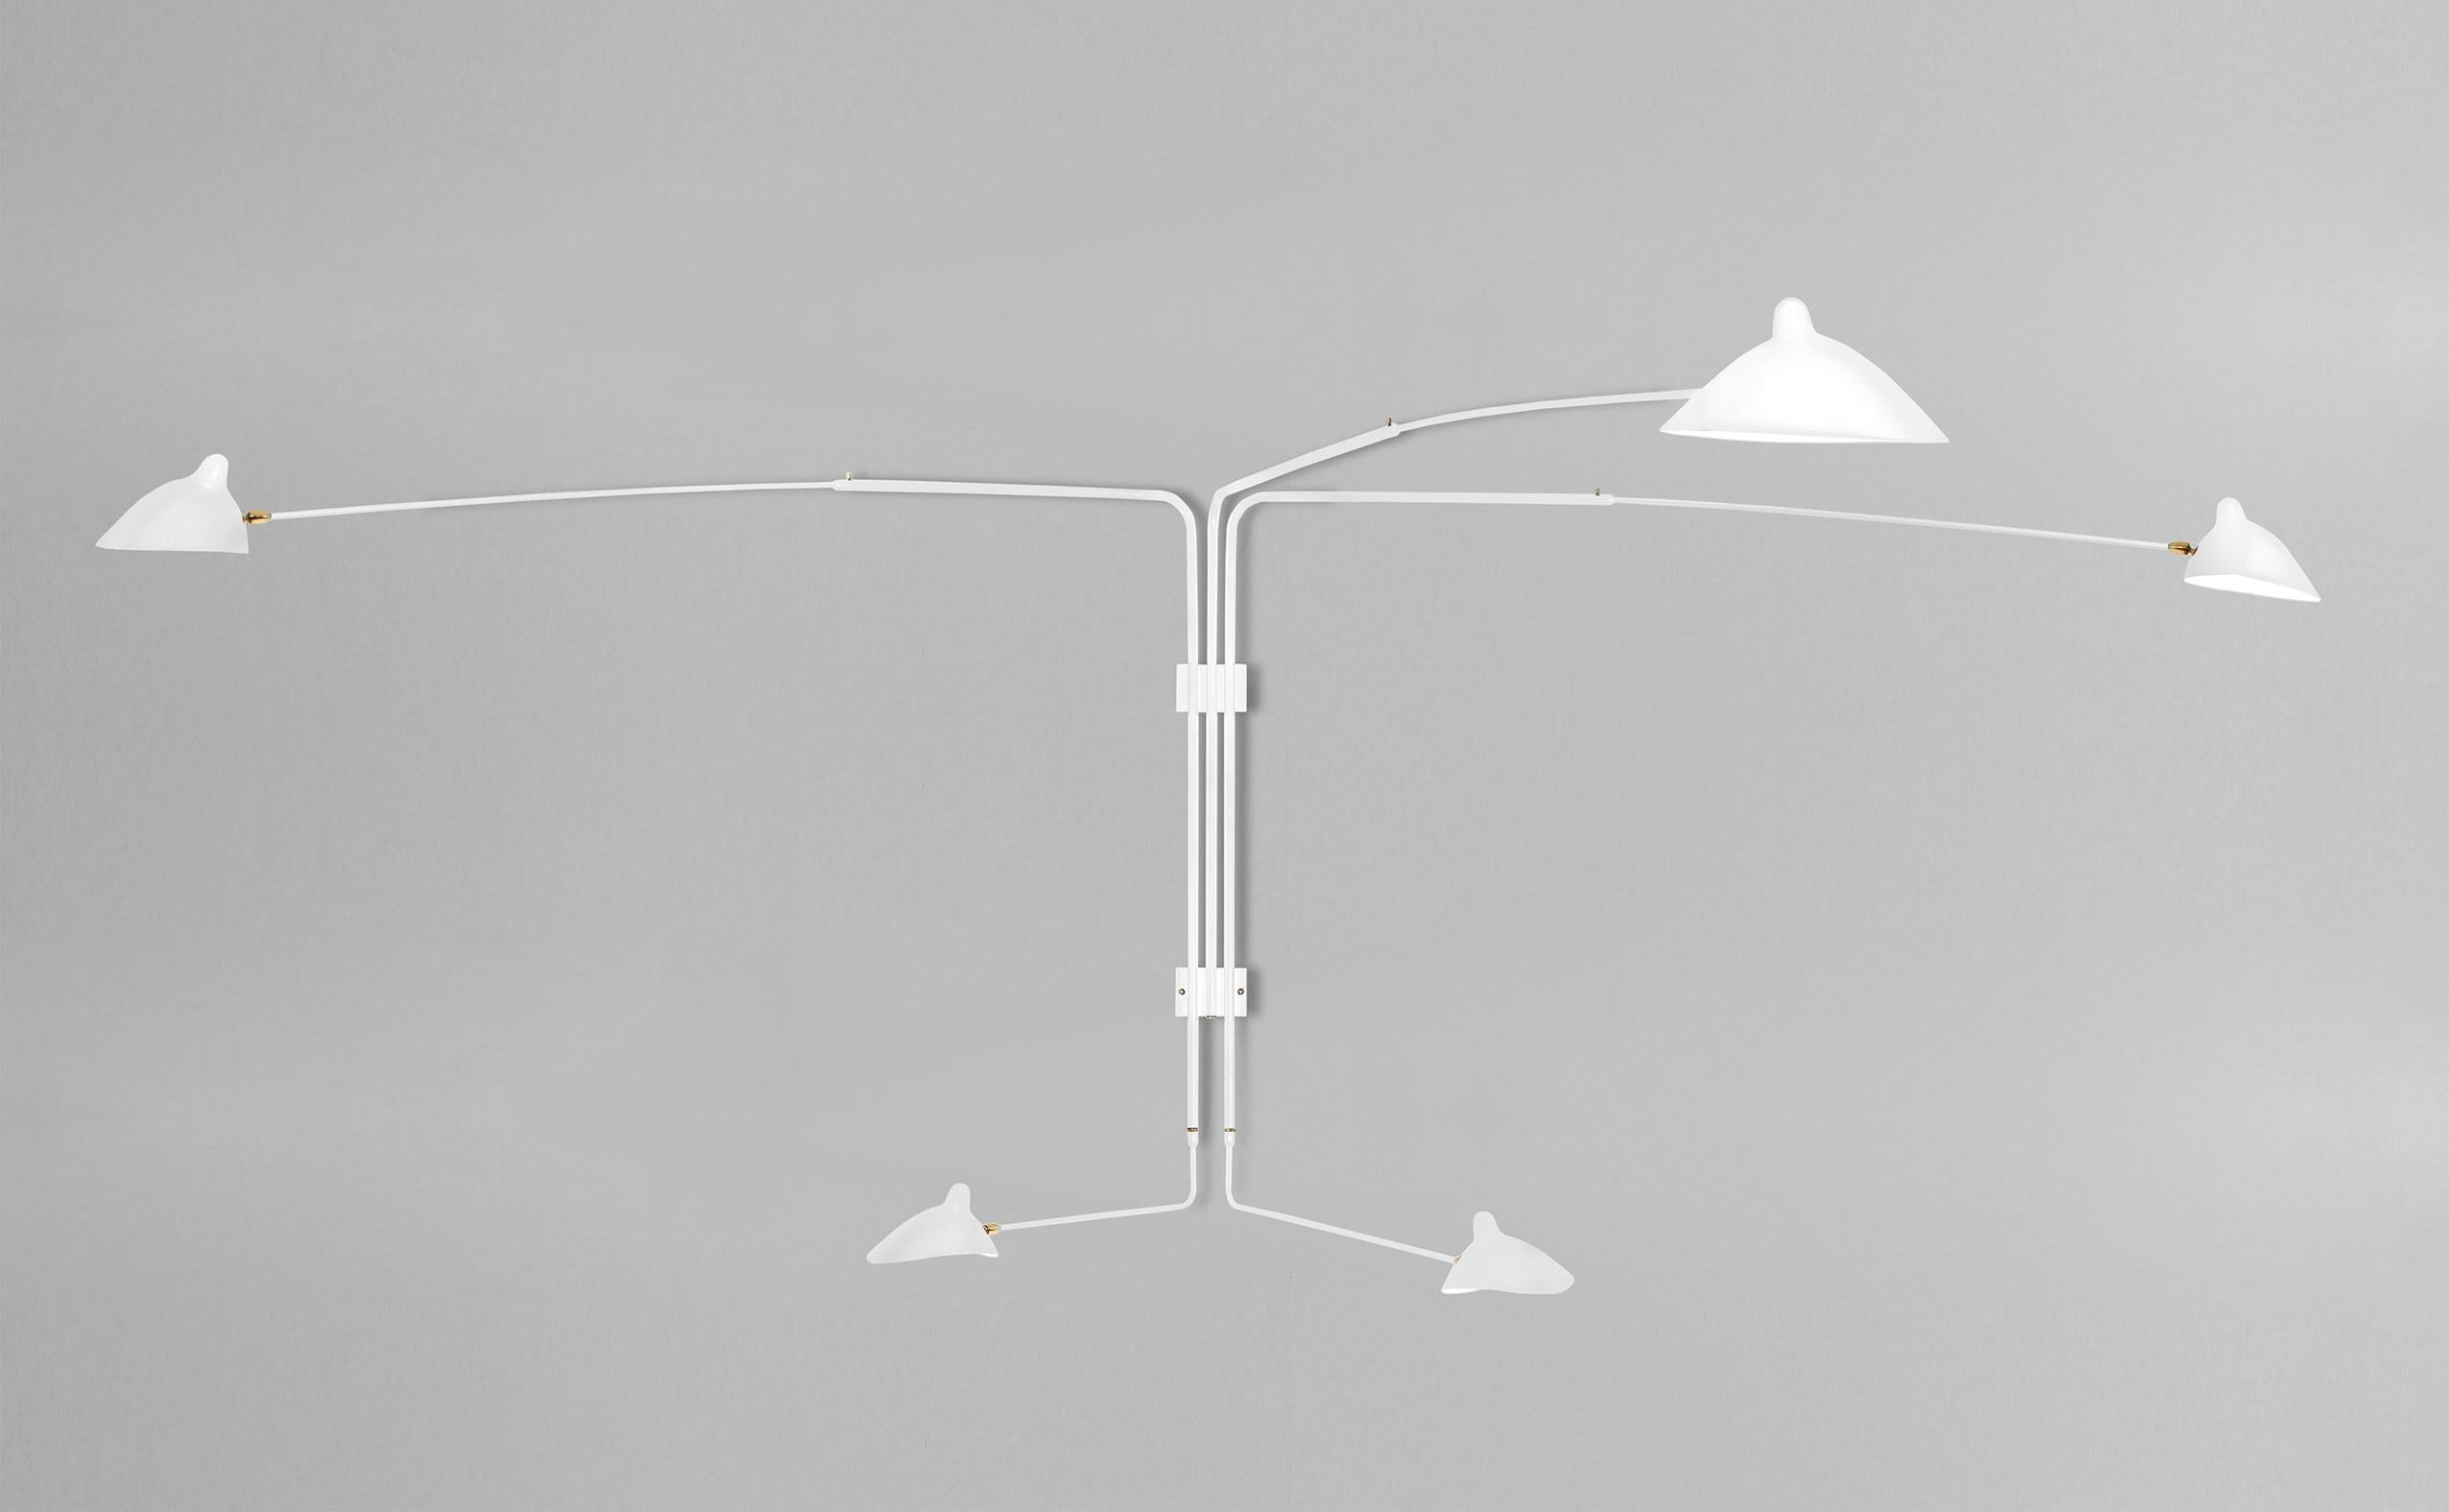 Wall lamp model 'Four Rotating Straight Arms Wall Lamp' designed by Serge Mouille in 1954.

Manufactured by Editions Serge Mouille in France. The production of lamps, wall lights and floor lamps are manufactured using craftsman’s techniques with the